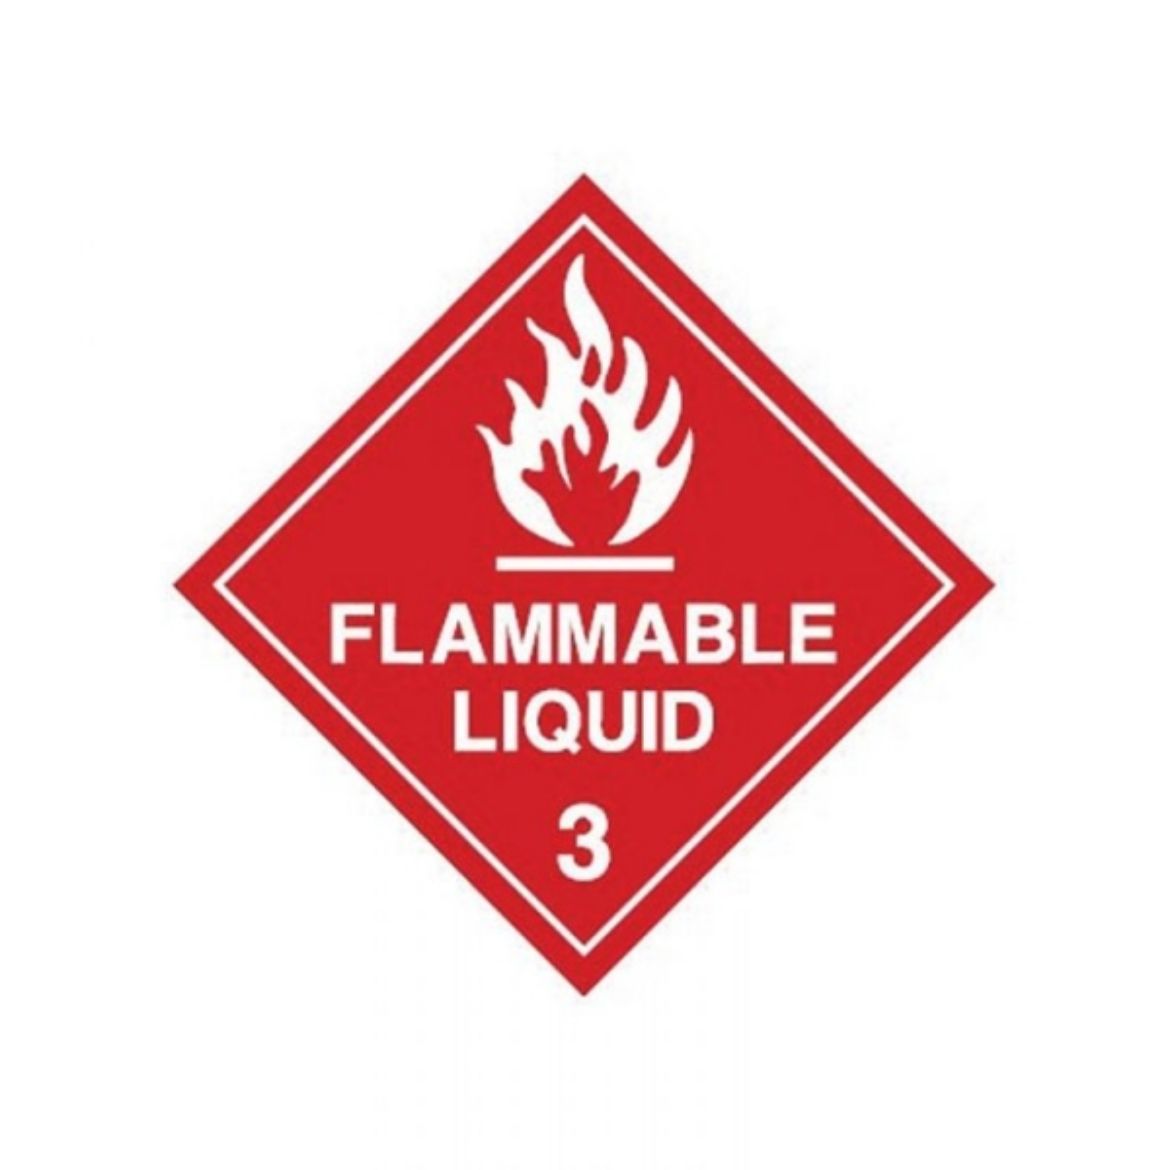 Picture of FLAMMABLE LIQUID 3 LABEL RED/WHITE 250MM (H) X 250MM (W) SELF ADHESIVE VINYL